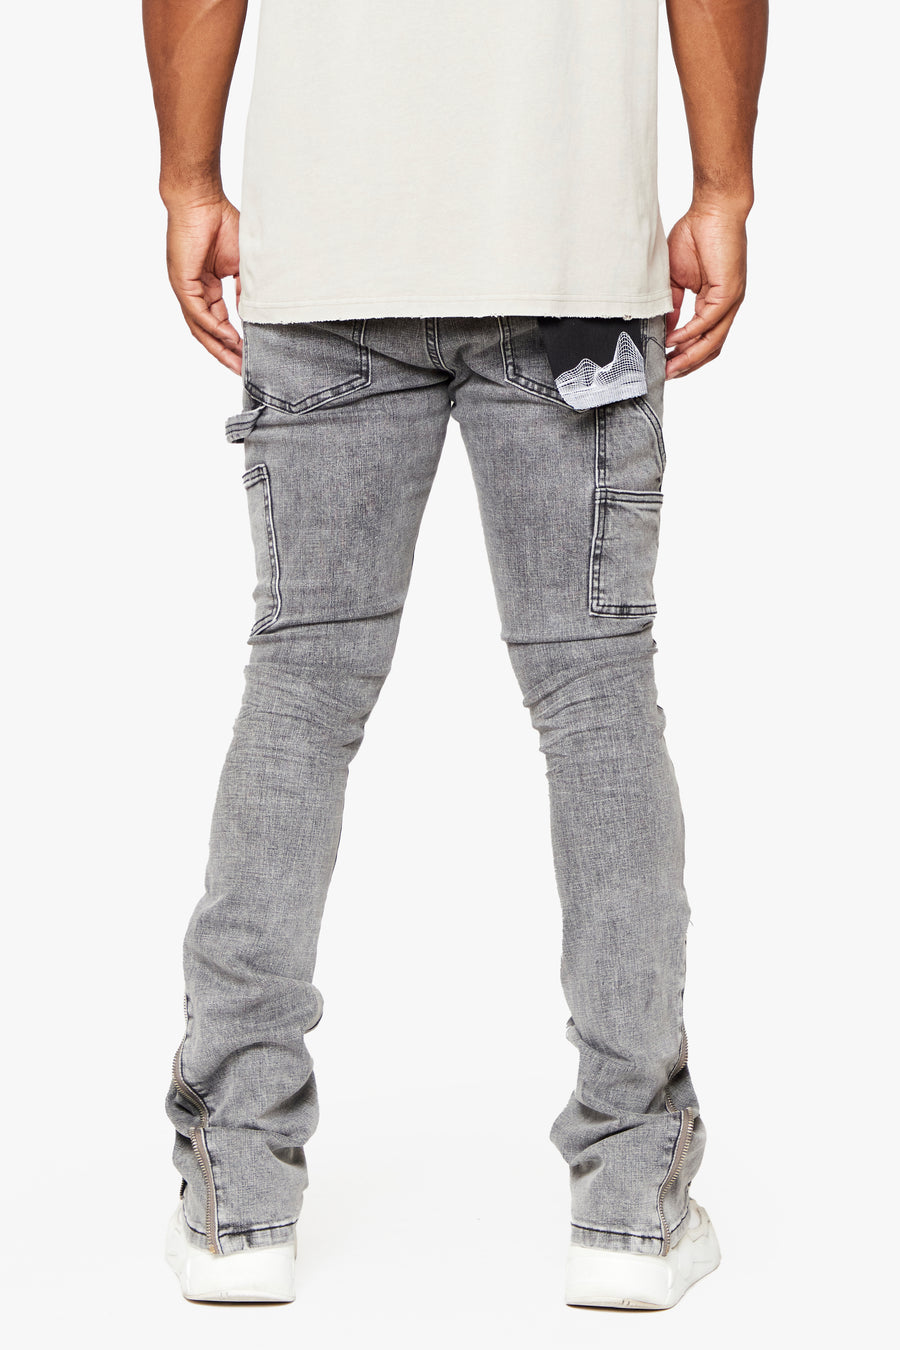 "STREAMLINE" GREY WASHED STACKED FLARE JEAN